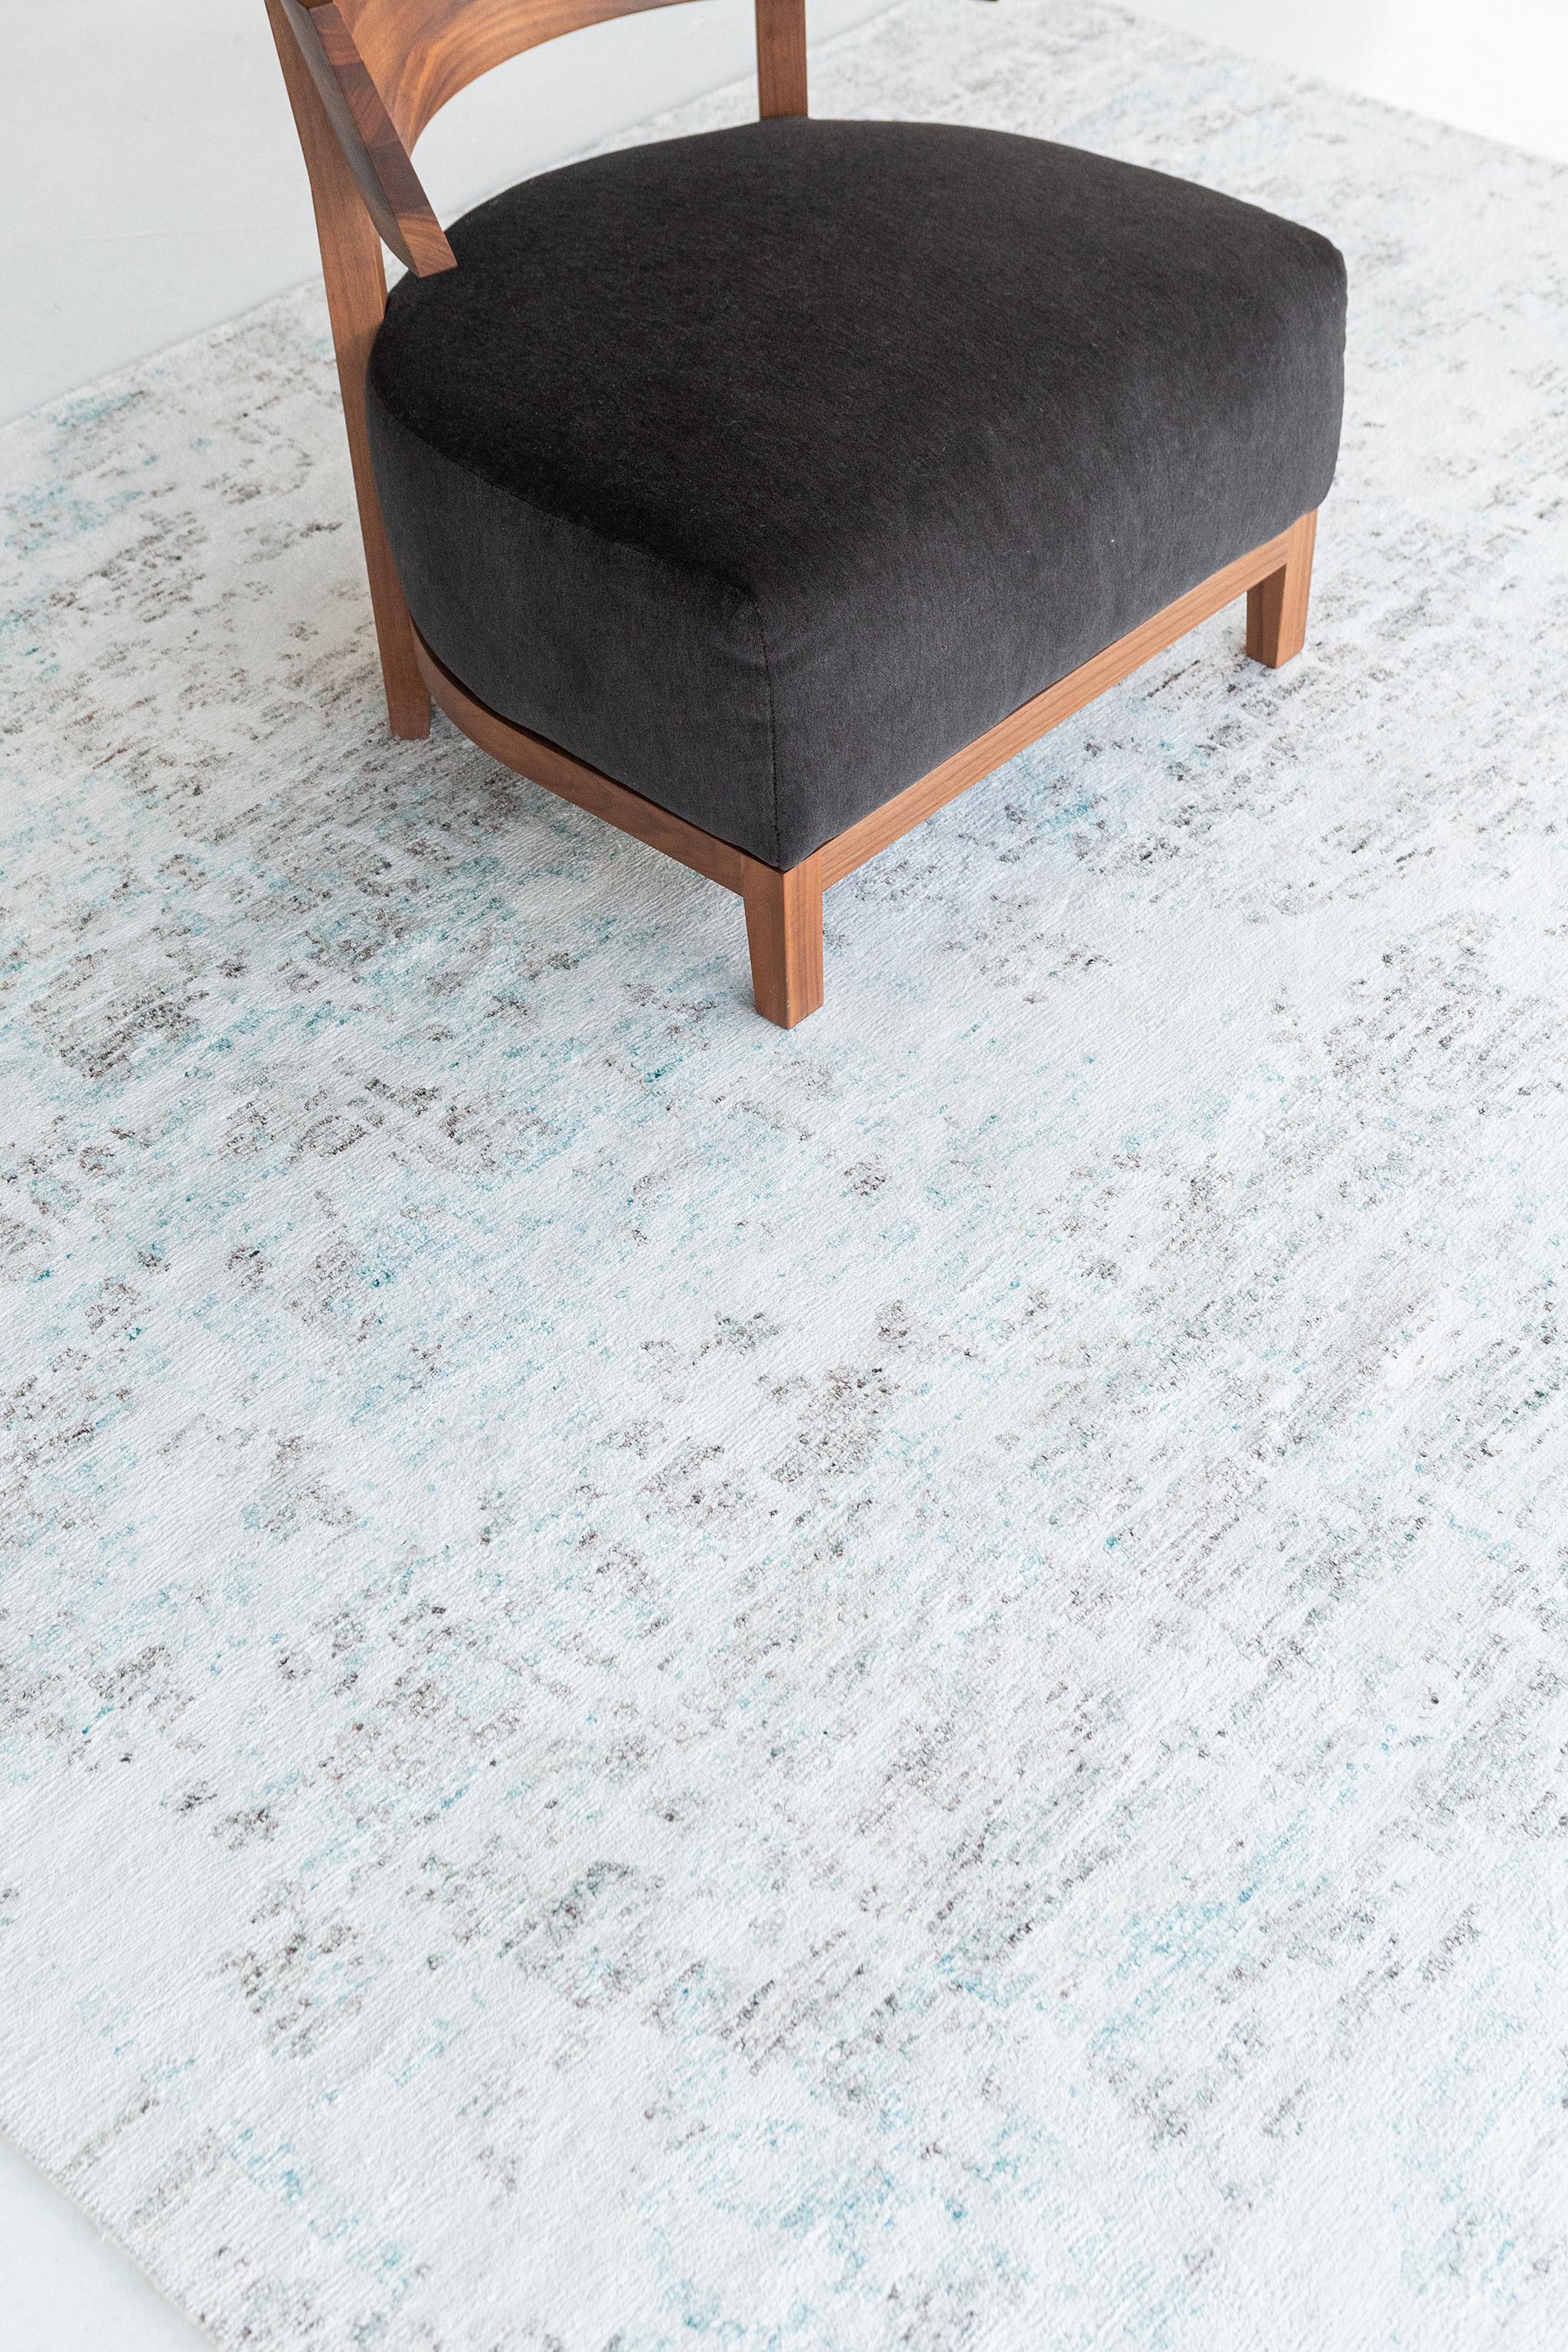 This mysterious Modern Design Bamboo Silk rug conjures up the spirit of Bohemia, with its playful combination of mint, white, and gray dominant colors. It is just as trendy and refined at the same time, perfect for any connoisseur of a fine